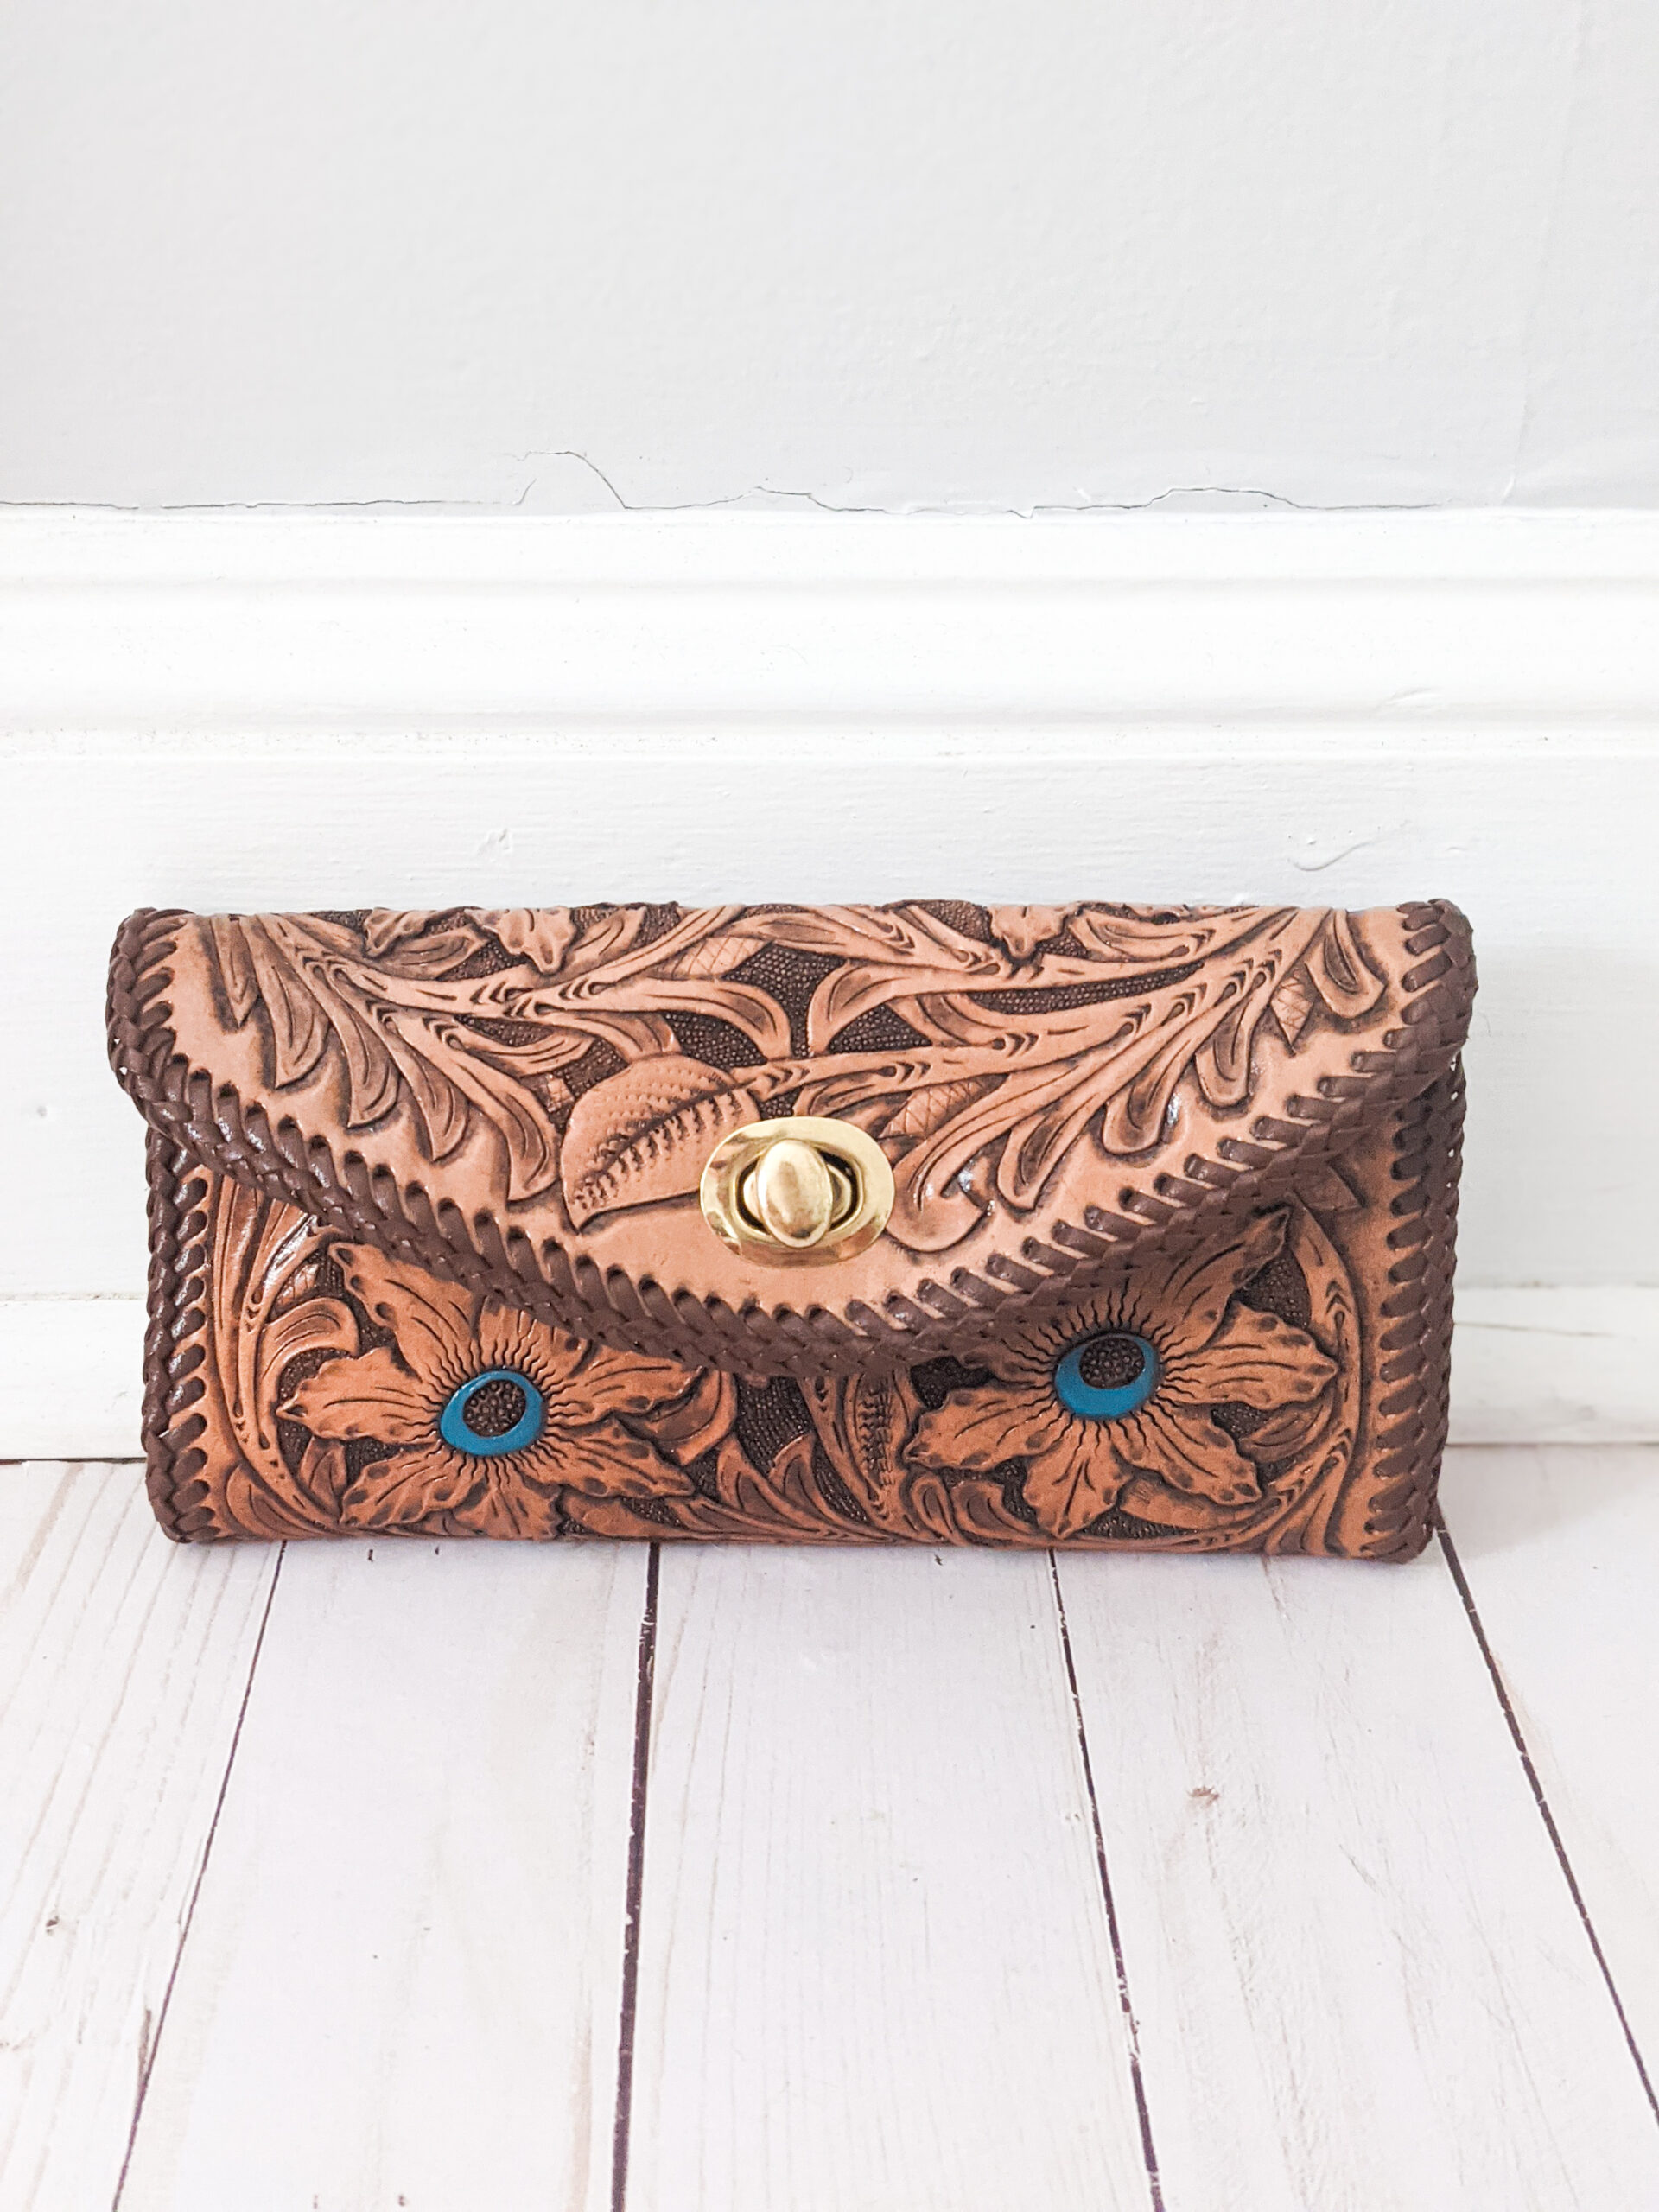 Buy Vintage Hand Tooled Leather Bag, Leather Clutch, Leather Tablet Case,  Brown Leather Purse, Tablet Bag, Hand Made Laptop Bag, Online in India -  Etsy